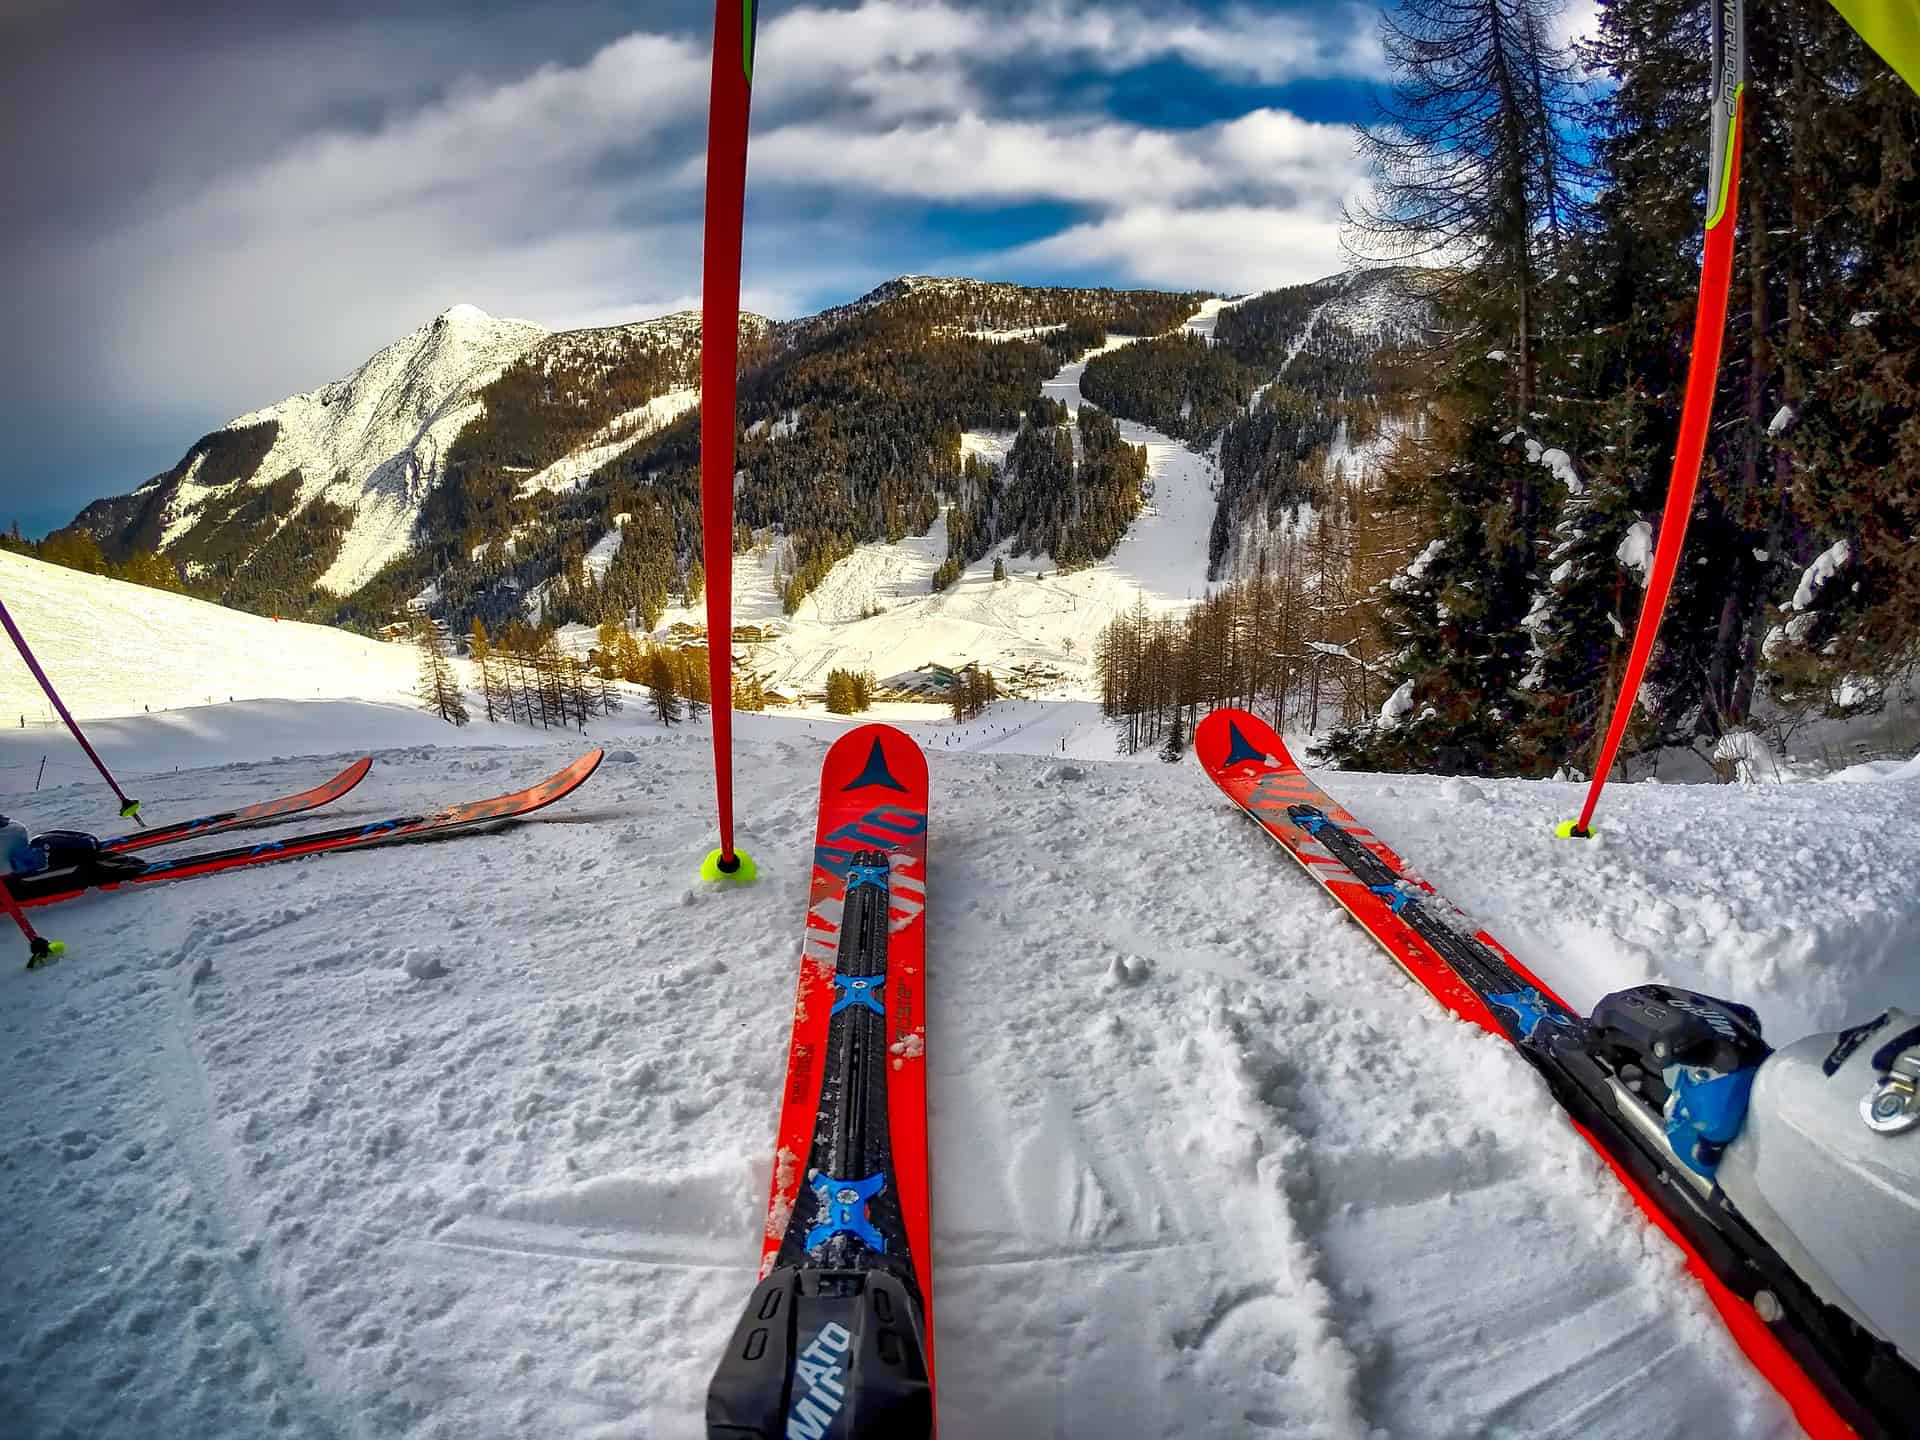 Skis on slopes in Colorado